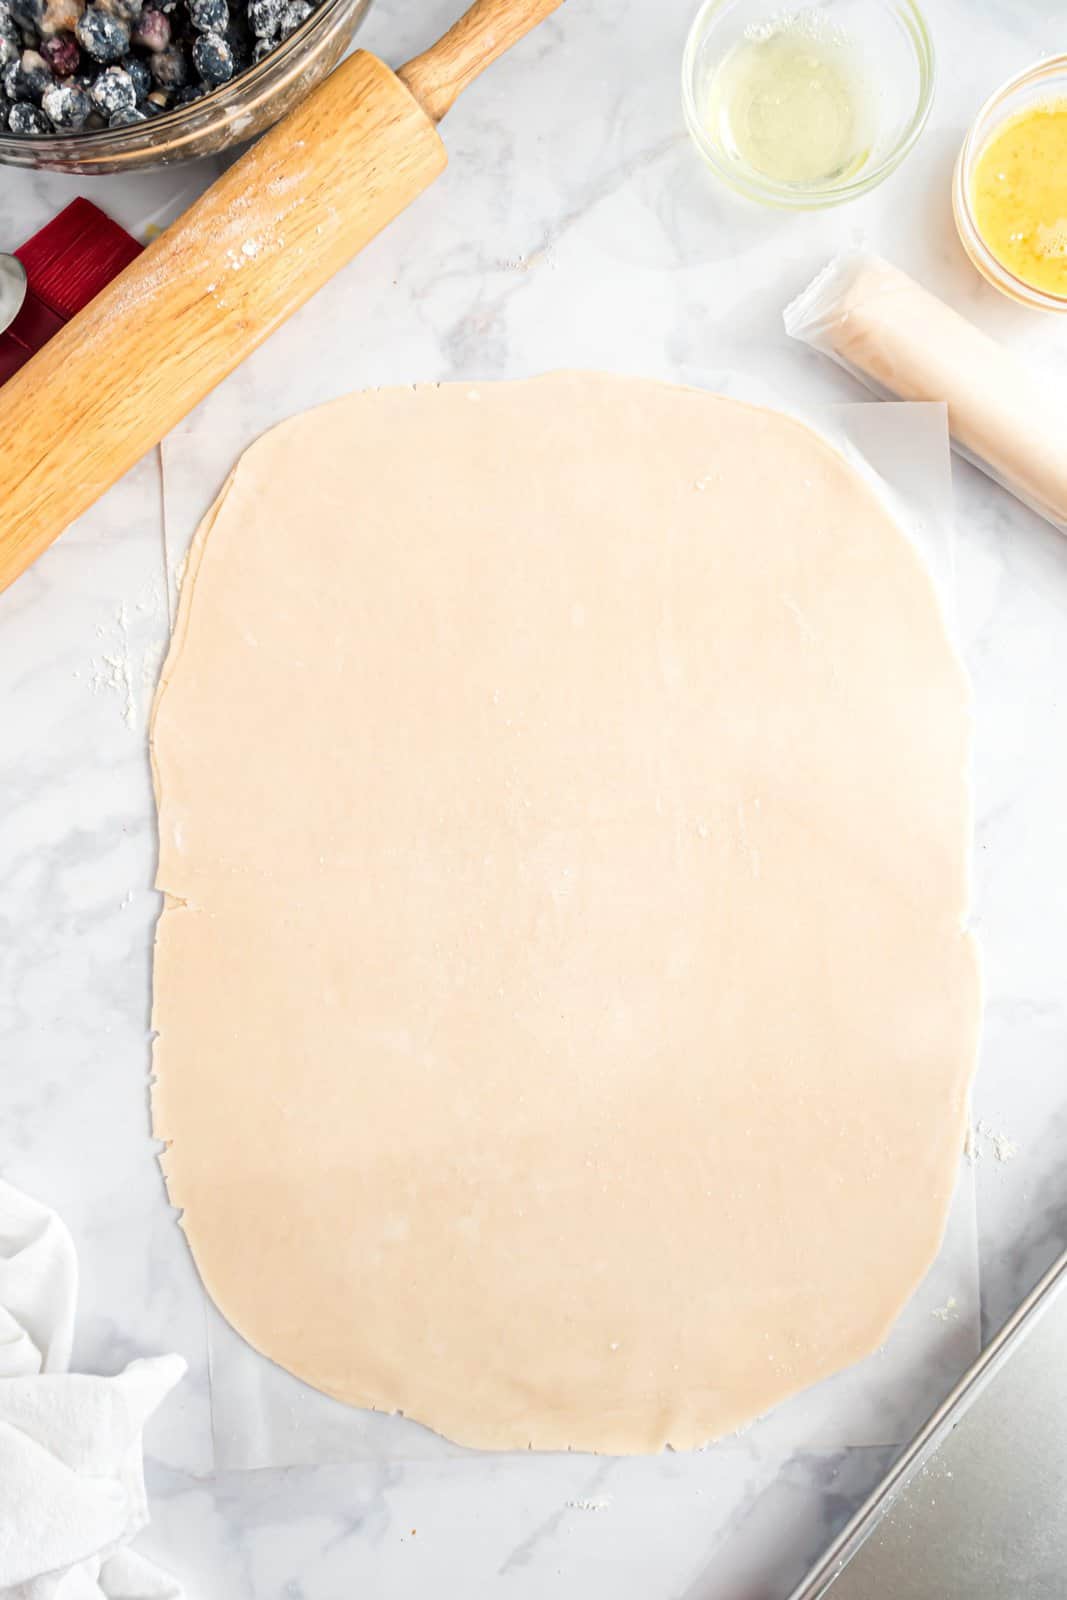 Dough rolled out into a rectangle.